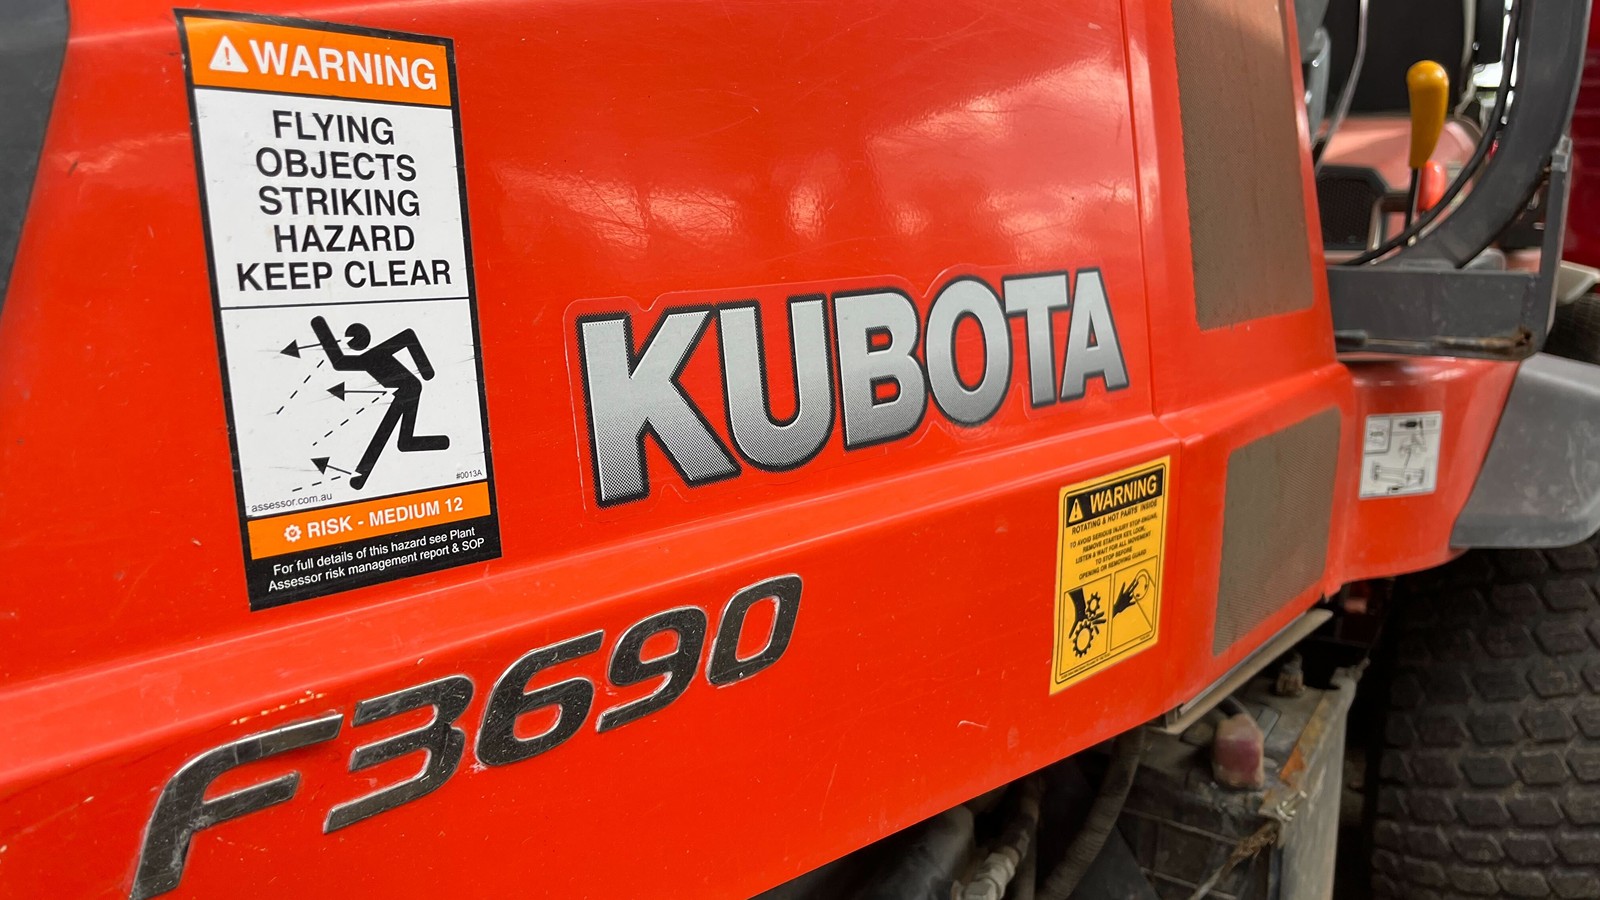 flying objects safety label on a red kubota machine